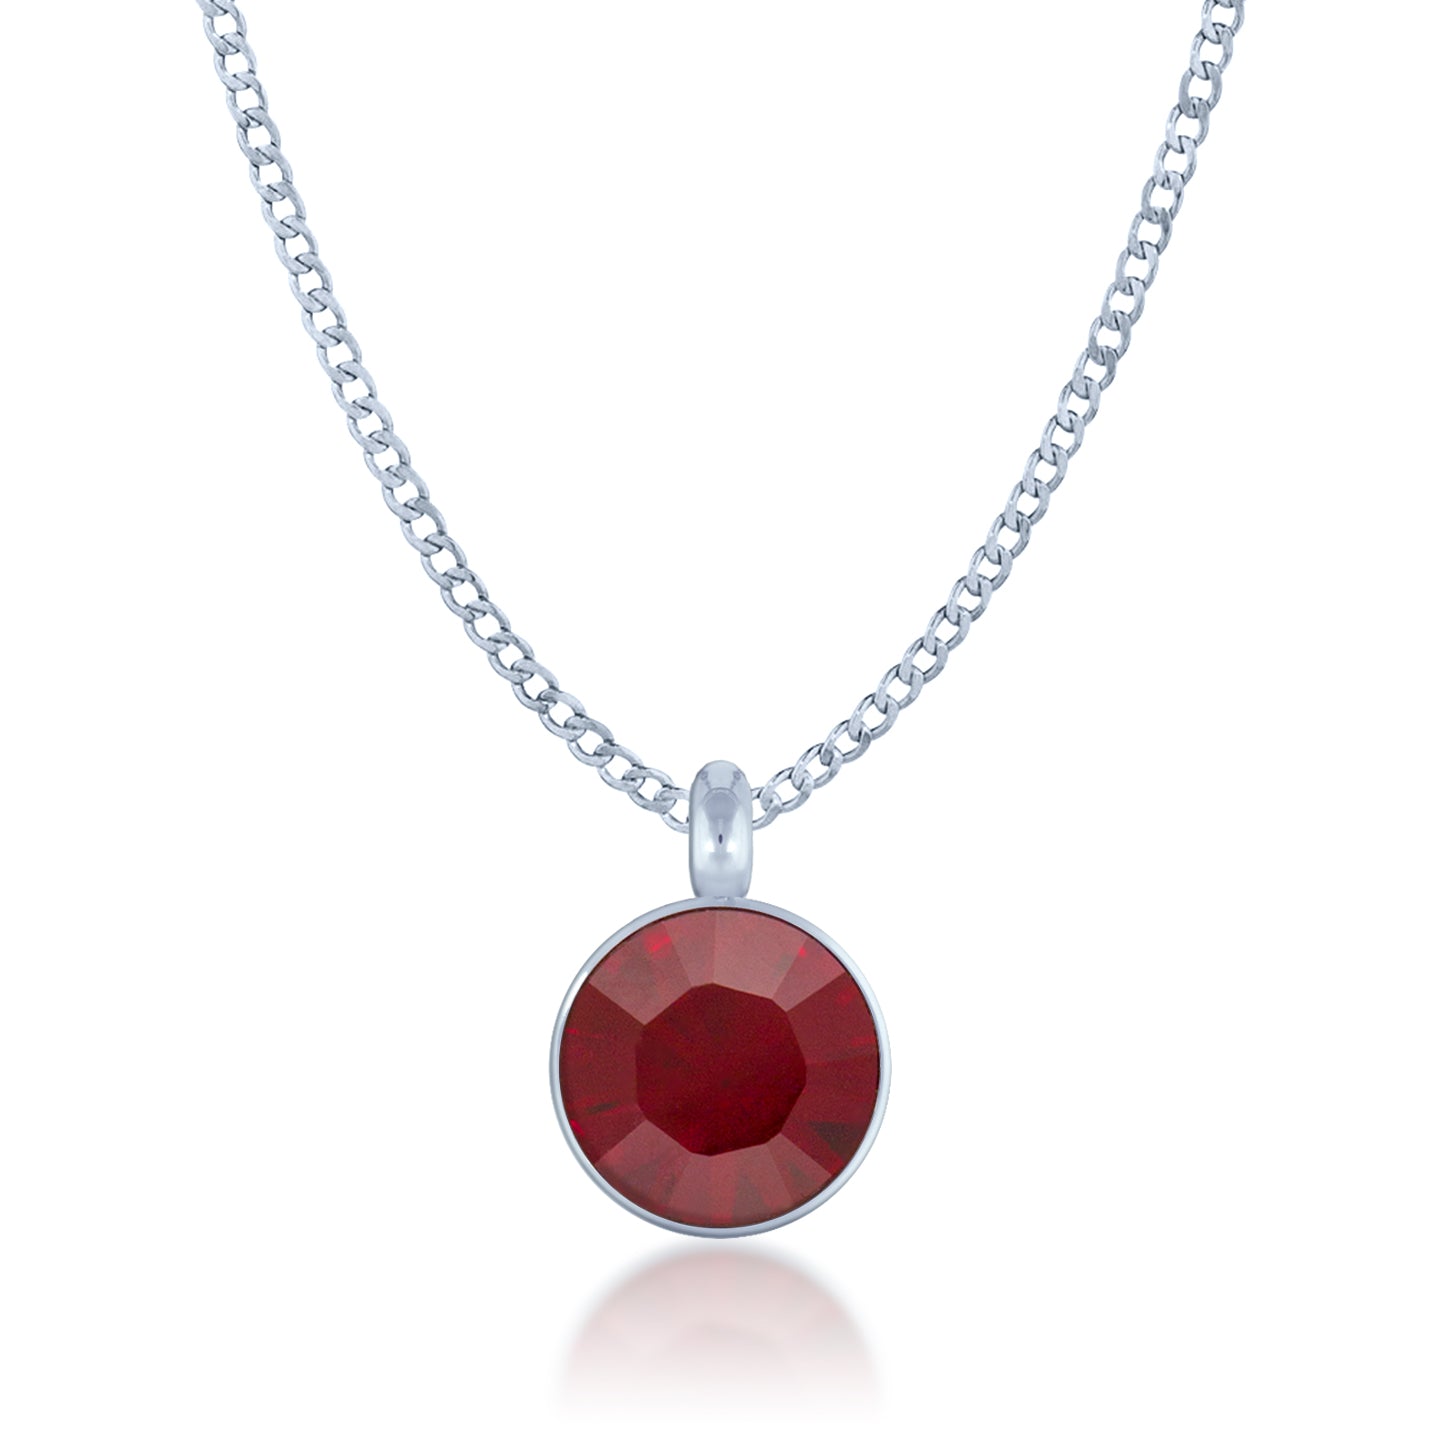 Bella Pendant Necklace with Red Siam Round Crystals from Swarovski Silver Toned Rhodium Plated - Ed Heart